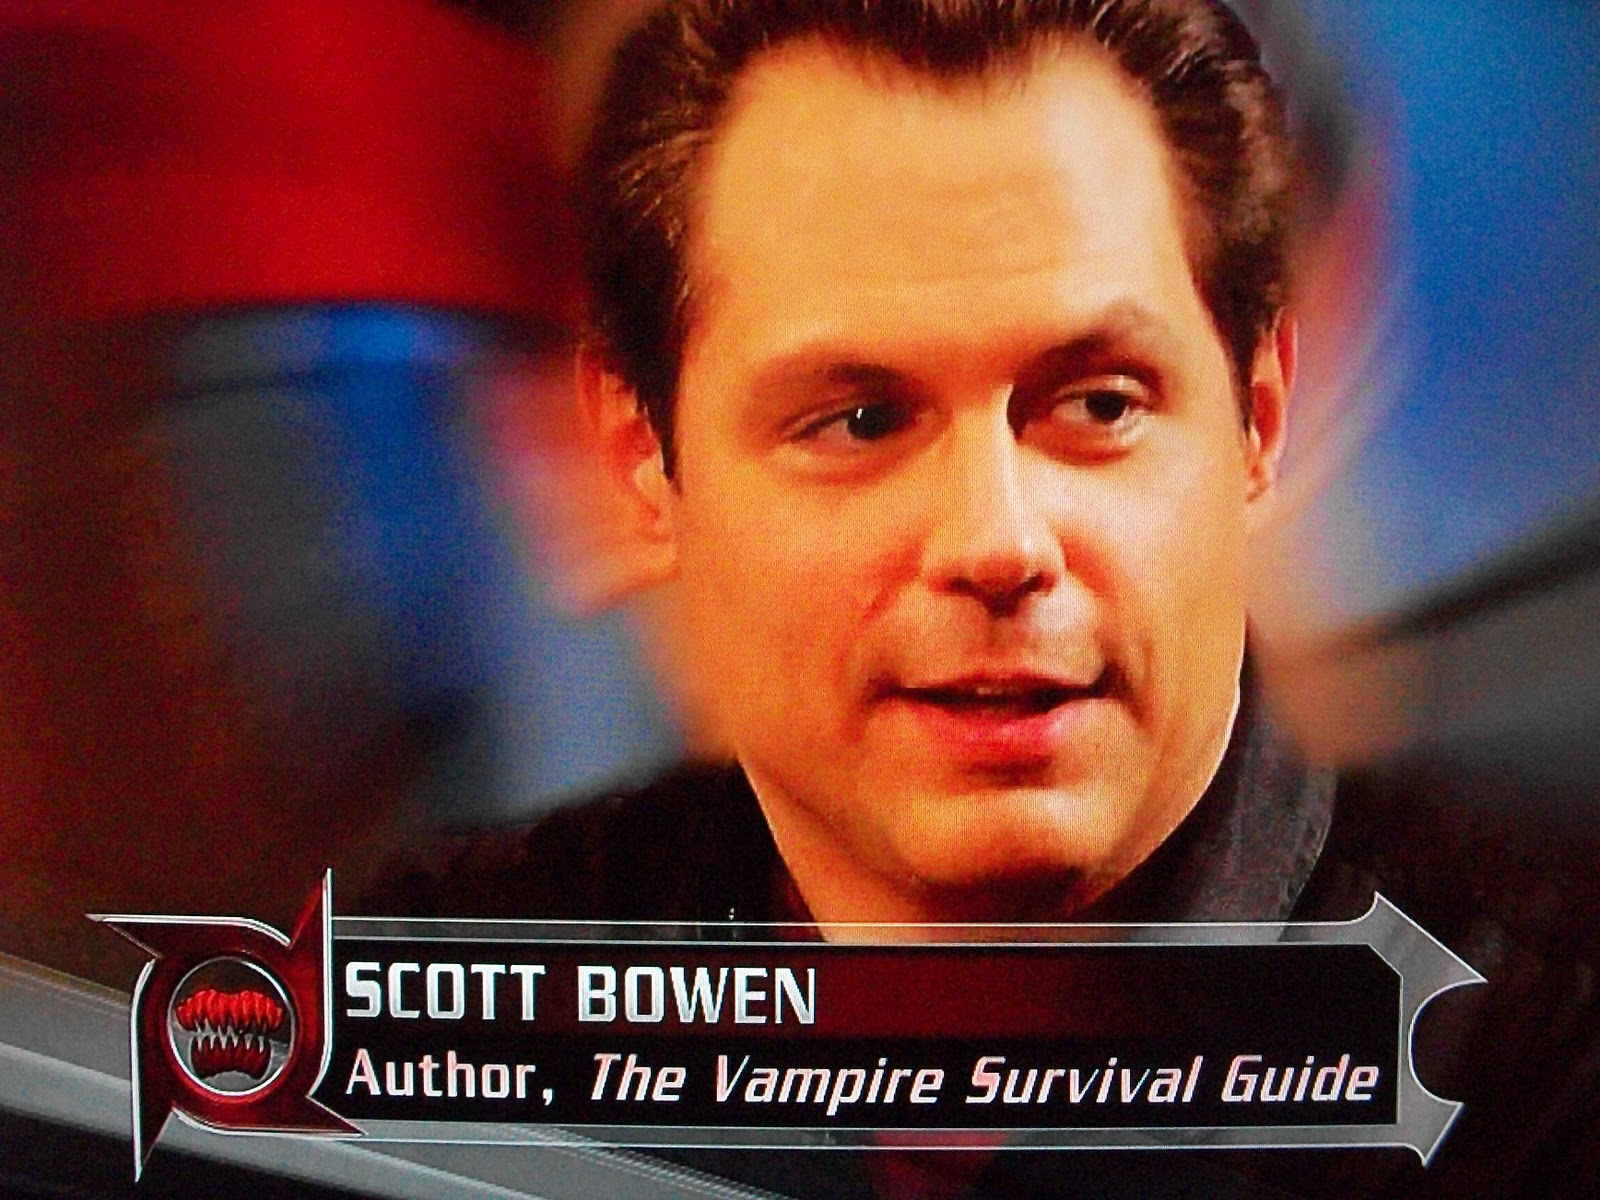 The Vampire Survival Guide: How to Fight, by Bowen, Scott